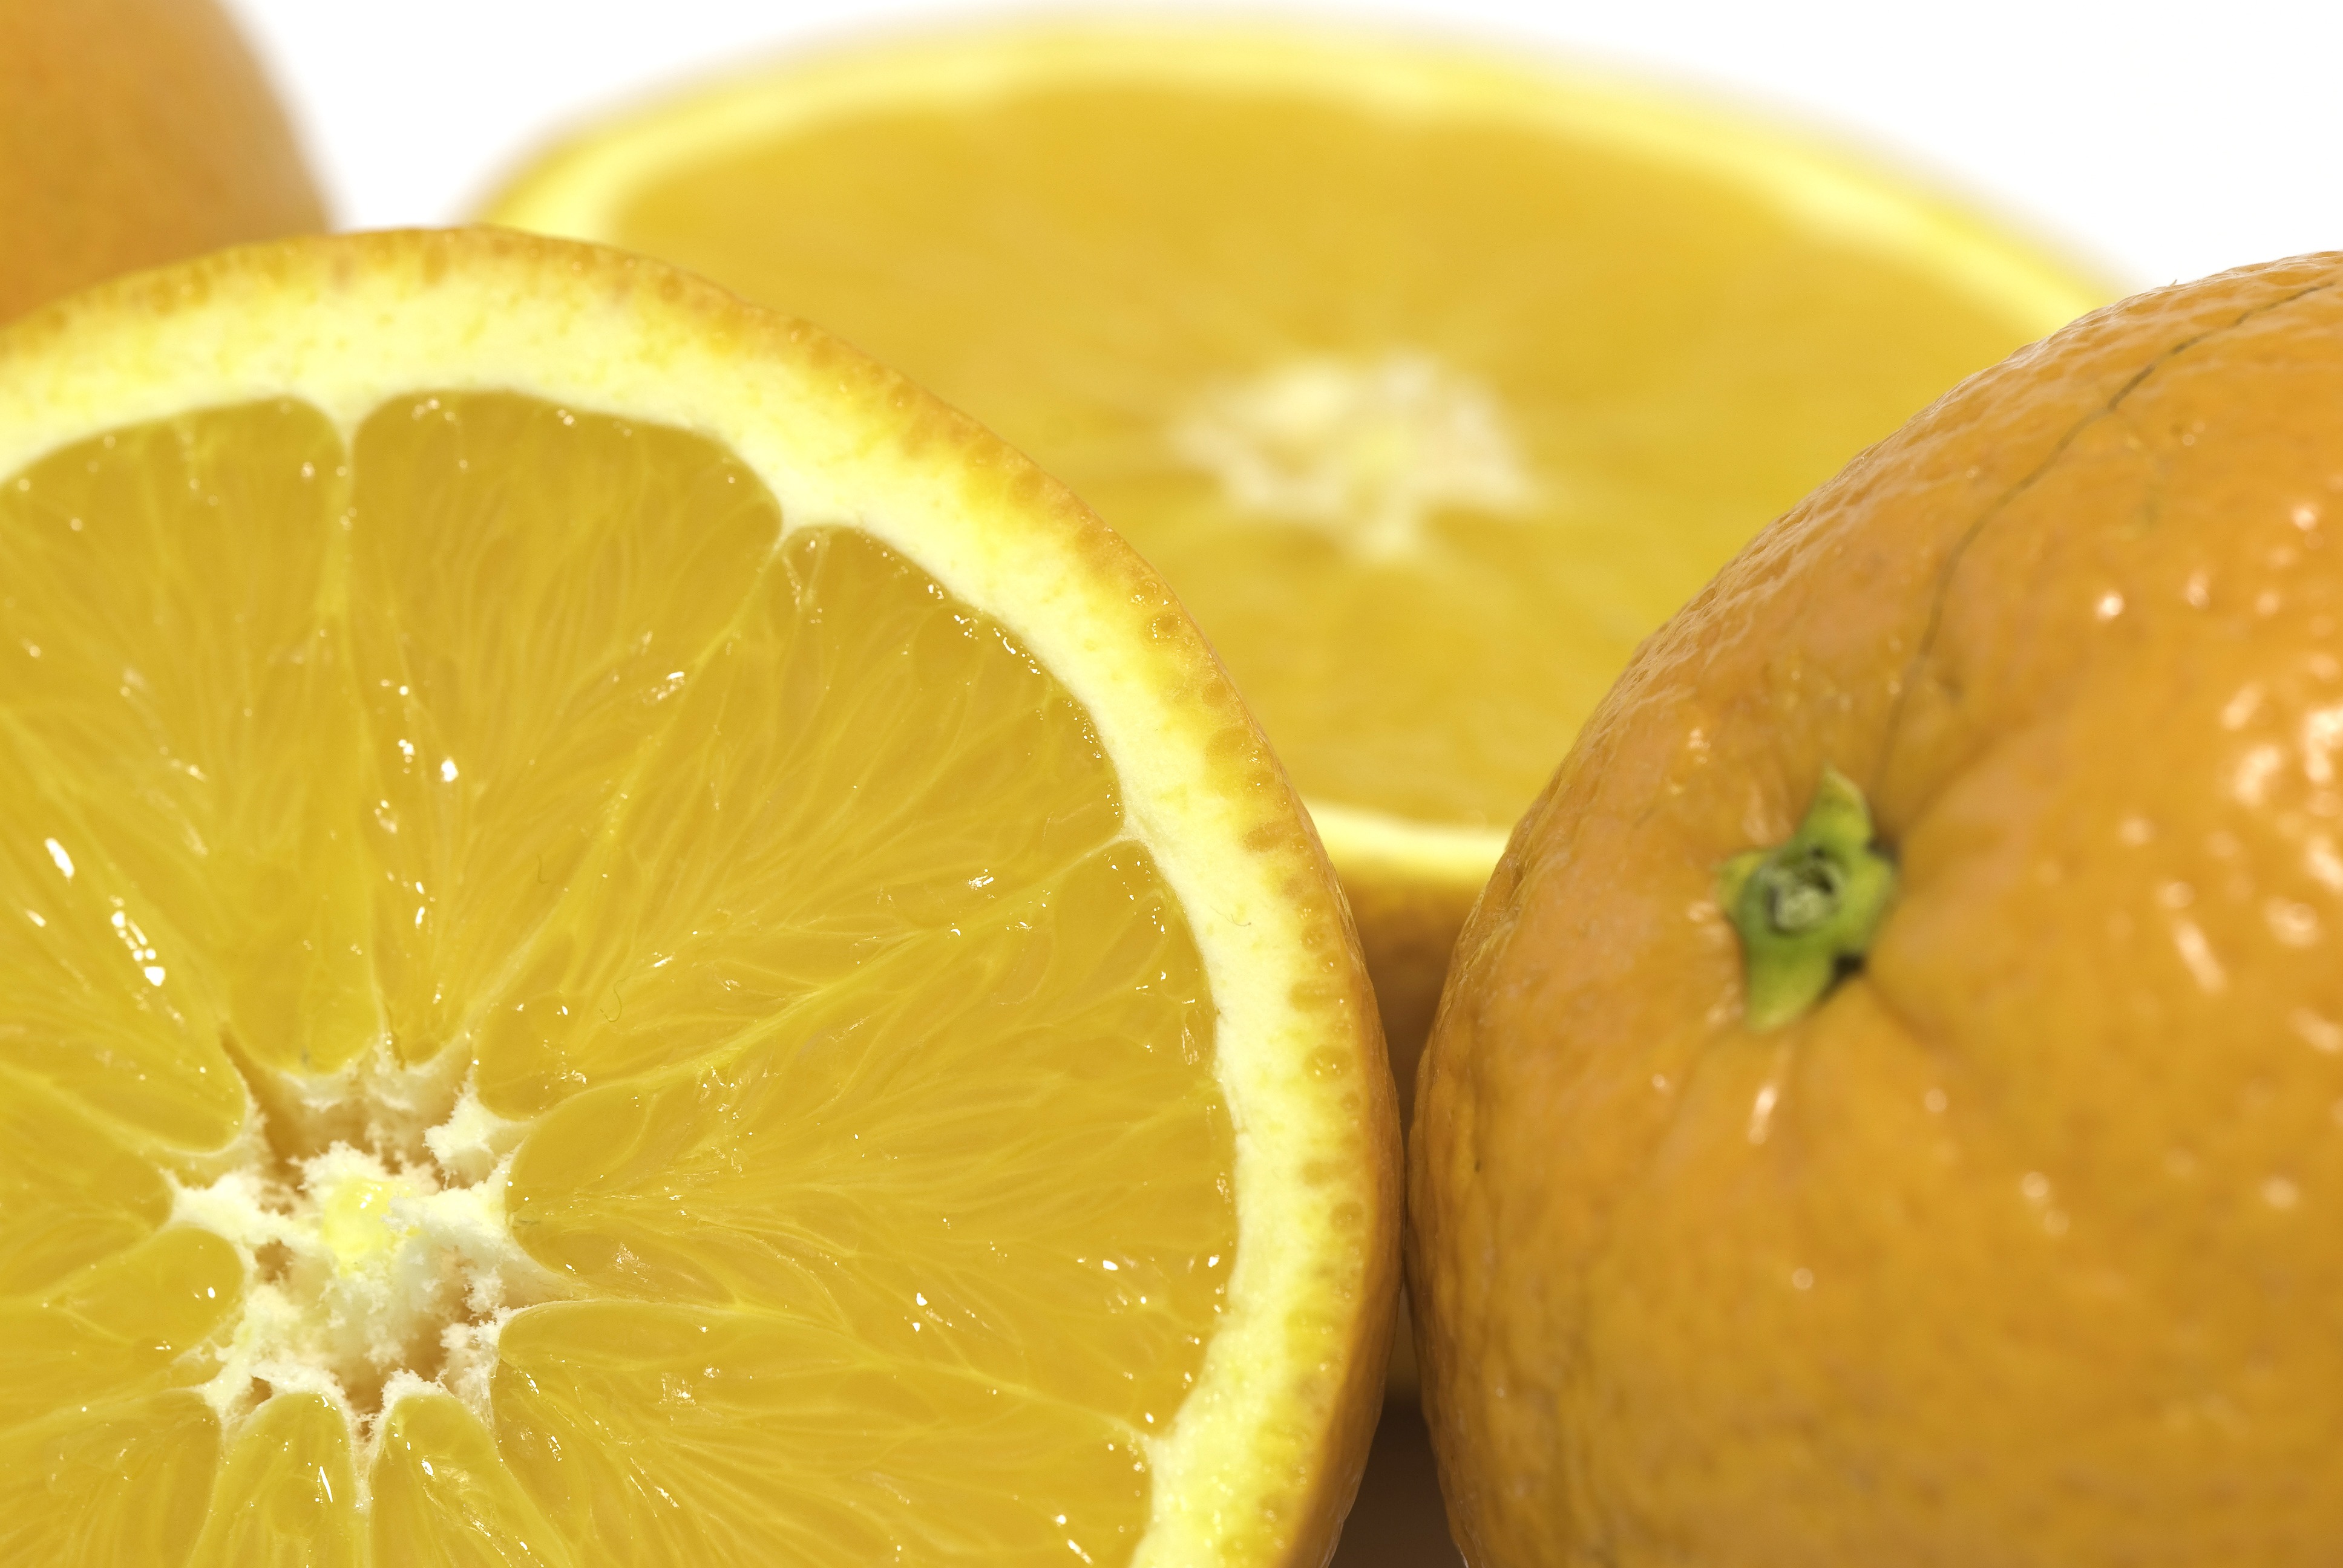 152251 free download Orange wallpapers for phone, citrus, food, fruit Orange images and screensavers for mobile